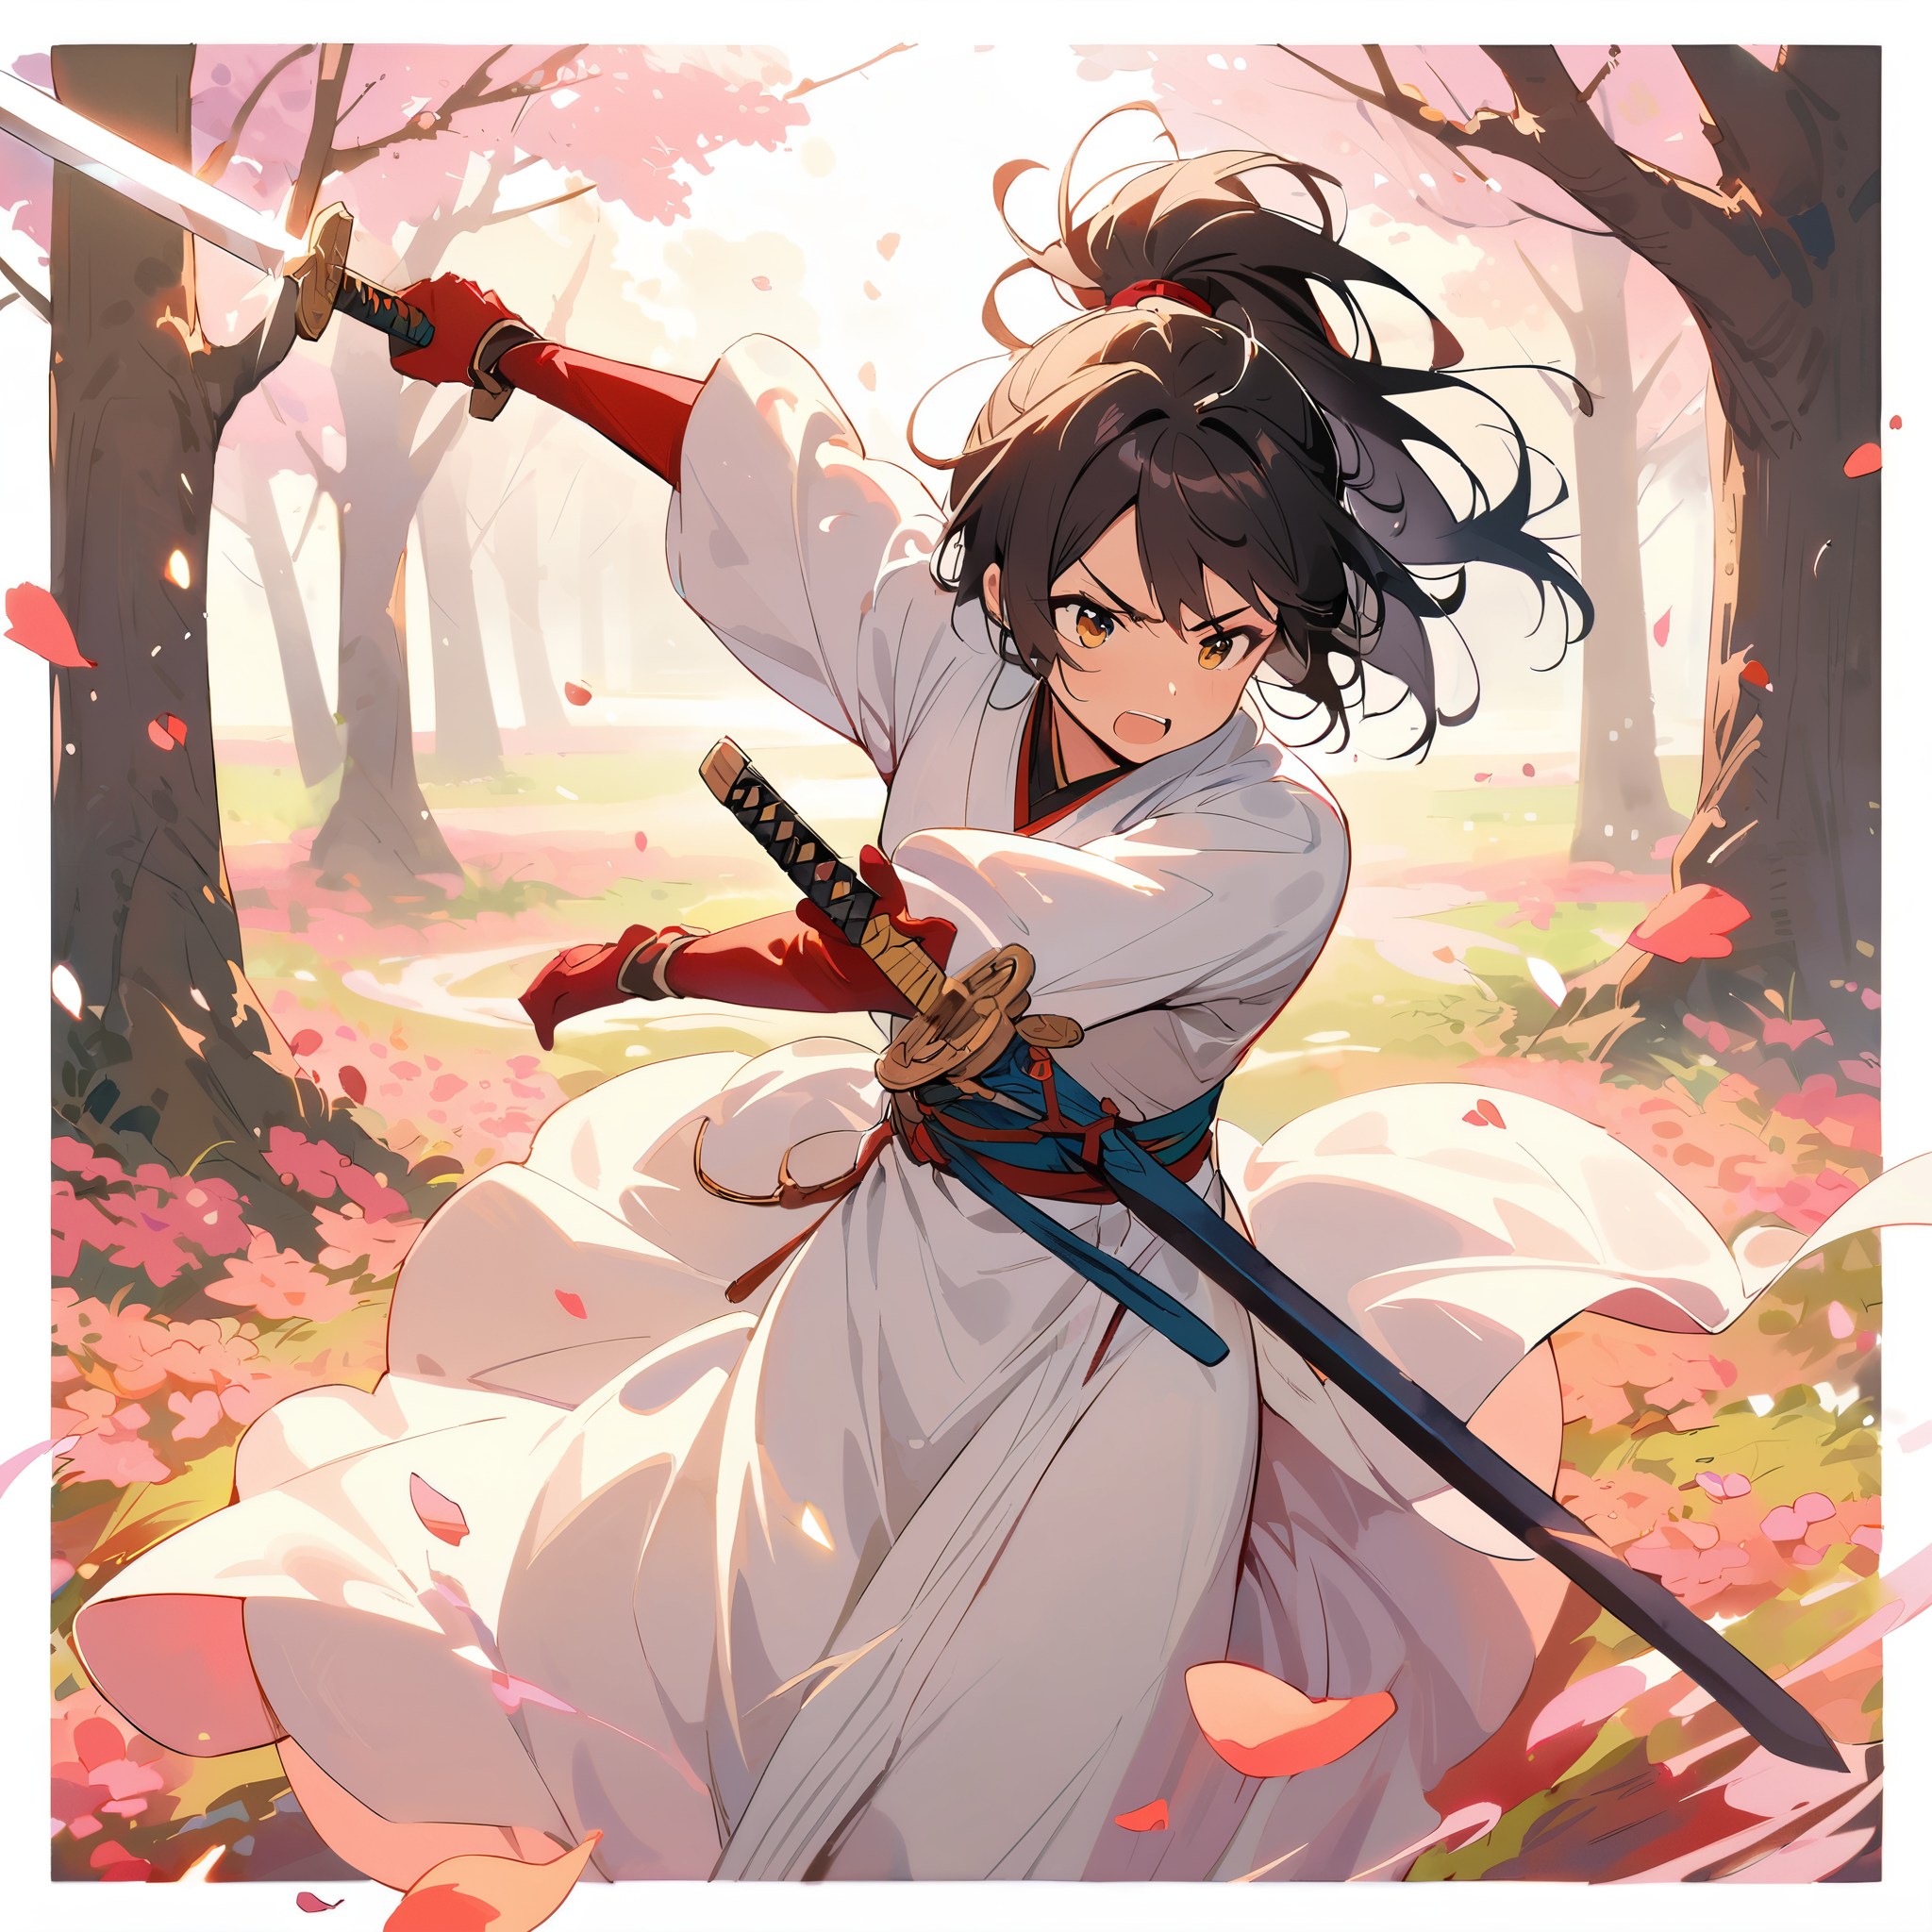 Spring Morning,(spring),(morning),(windy),(blood),(motion blur),(dress in white),Petals fluttering in the wind, shining swords, helpless expression, anger, fighting with death, very detailed expression, very detailed petals,ponytail, 2swordsman fighting,fight,gongfu,stand in trees, 2swordsman stood in a peach tree forest with petals dancing,petals , detailed ,completing the stable diffusion of serenity and contentment,masterpiece, best quality,masterpiece, best quality, swordman,holding a sword(trees:0.5),(eagle:0.5), (bamboo:0.2) fighting stance, 1man, glowing, solo, weapon, sword, tree, holding, gloves, outdoors, sheath, border, holding weapon, black hair, holding sword, fur trim, looking away,look at view